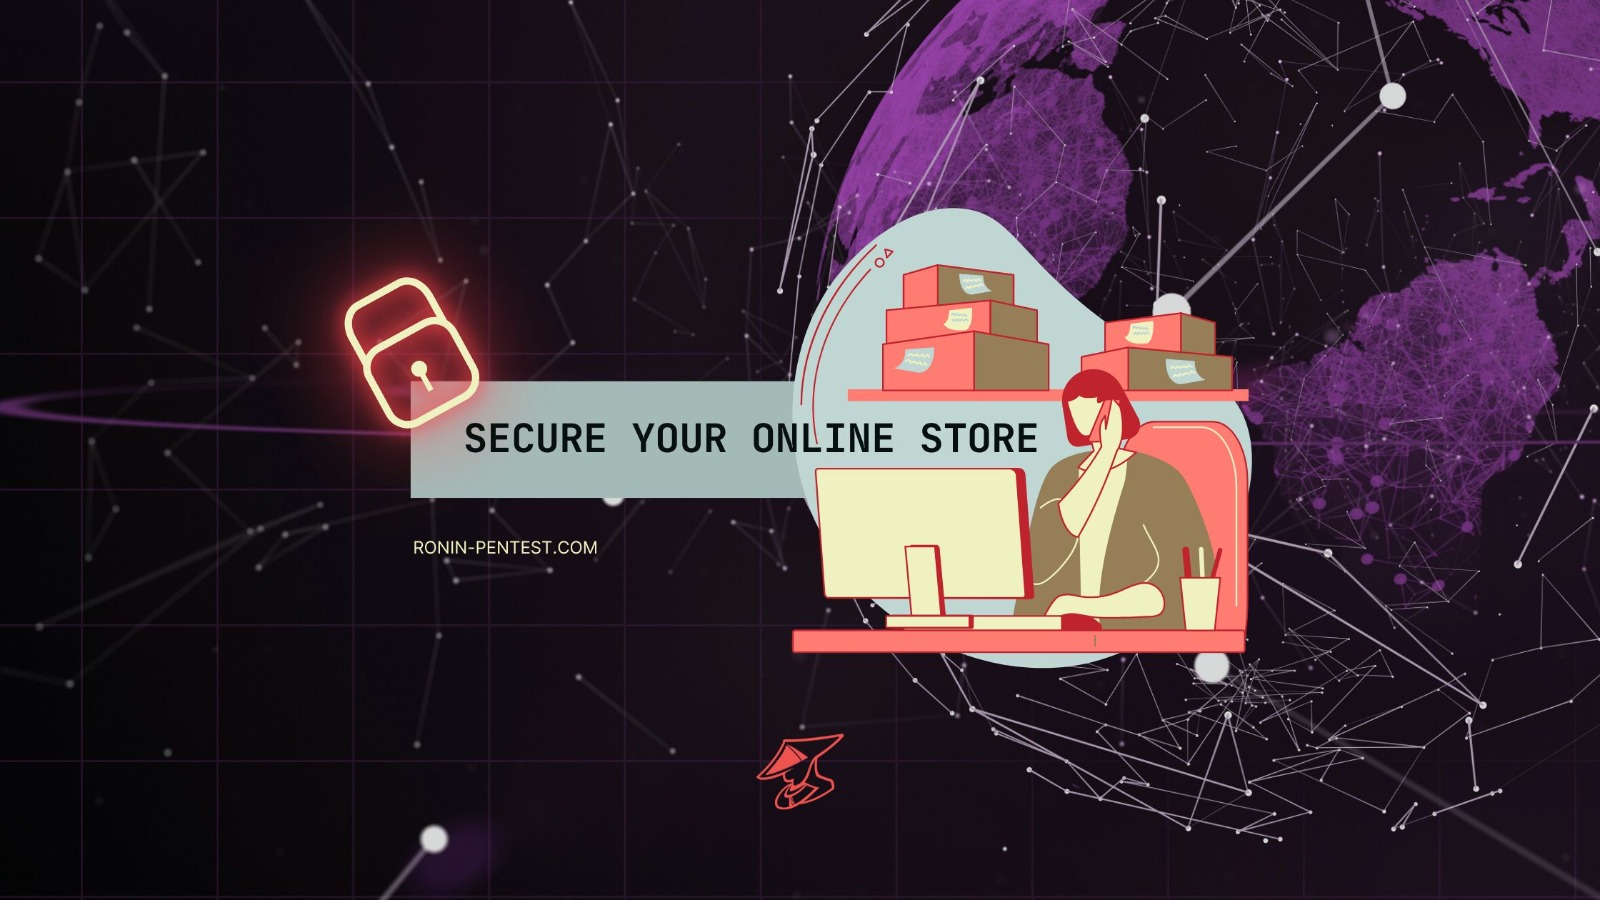 Ronin Pentest | The Ultimate E-Commerce Security Guide for Online Sellers with Ronin Pentest